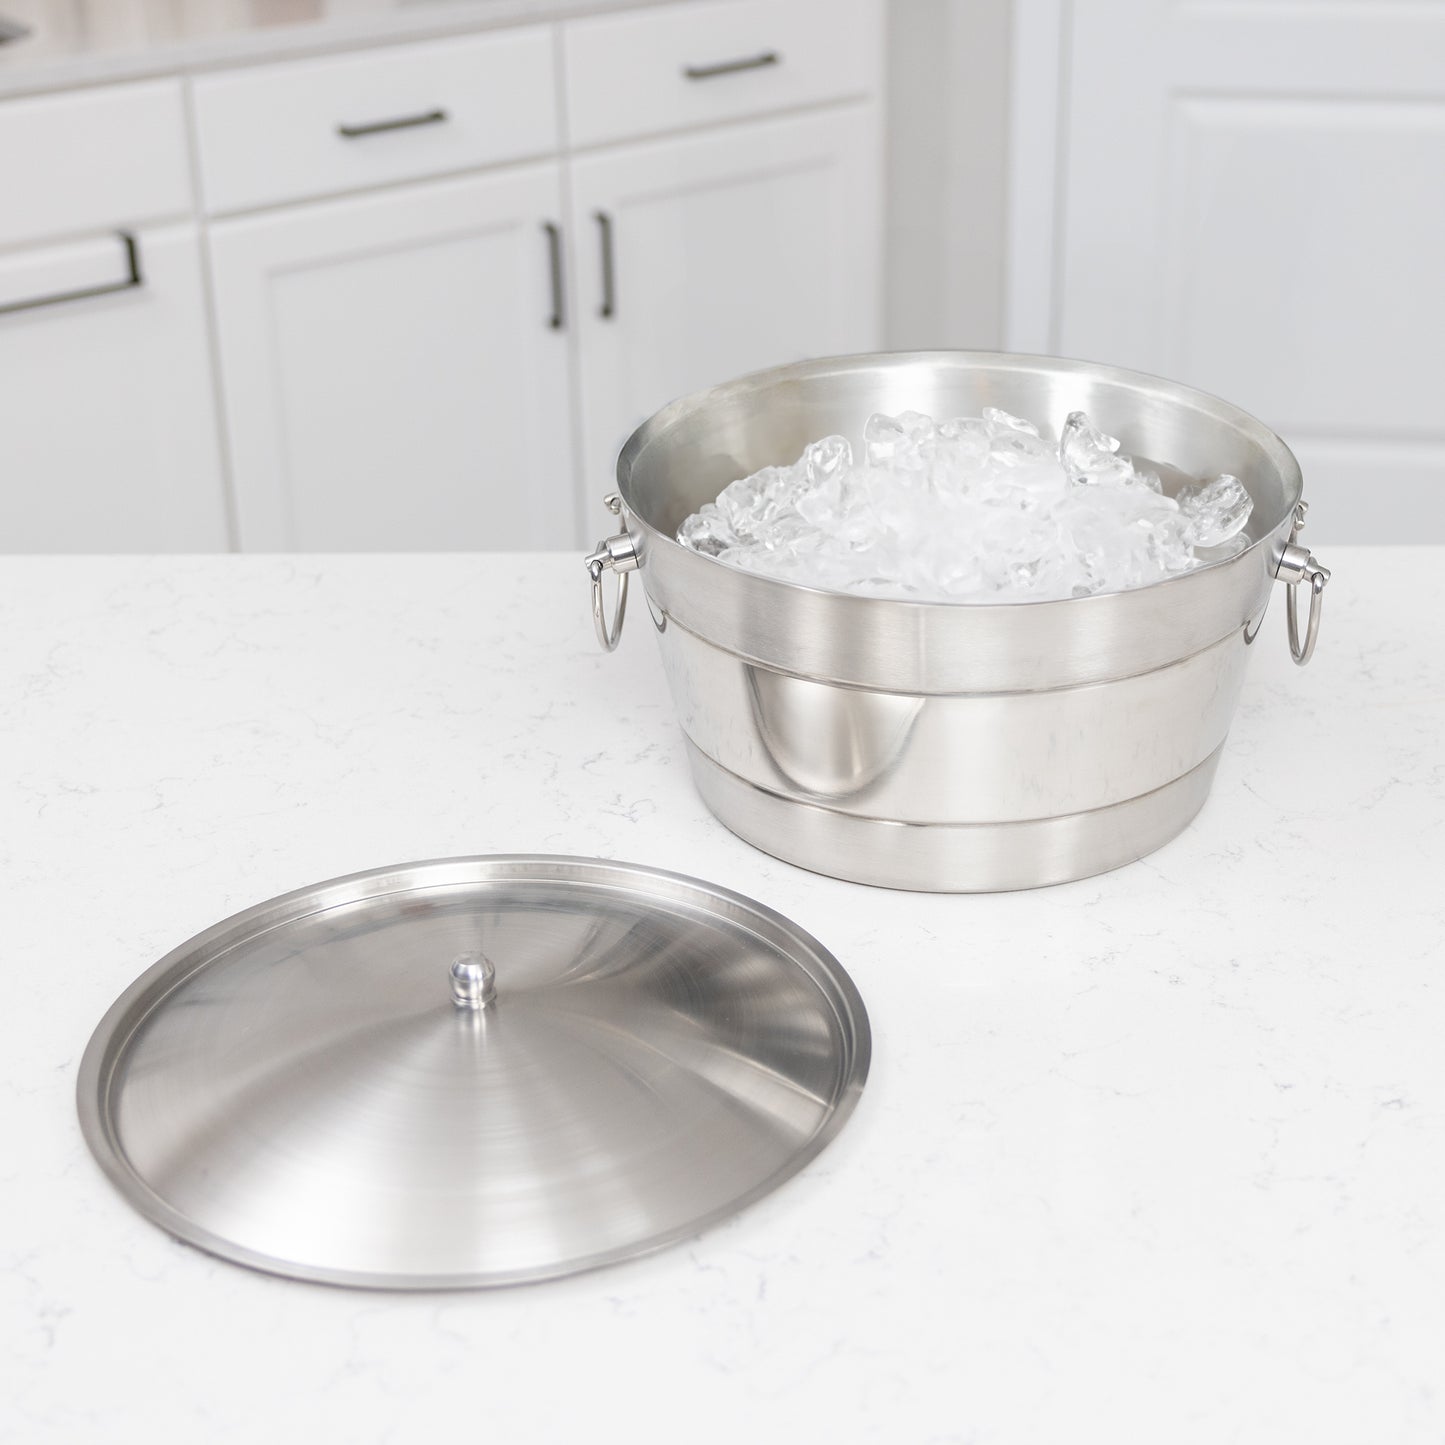 Personalized Ice Bucket with Lid - Brush Ribbed Stainless Steel Anchored by BREKX